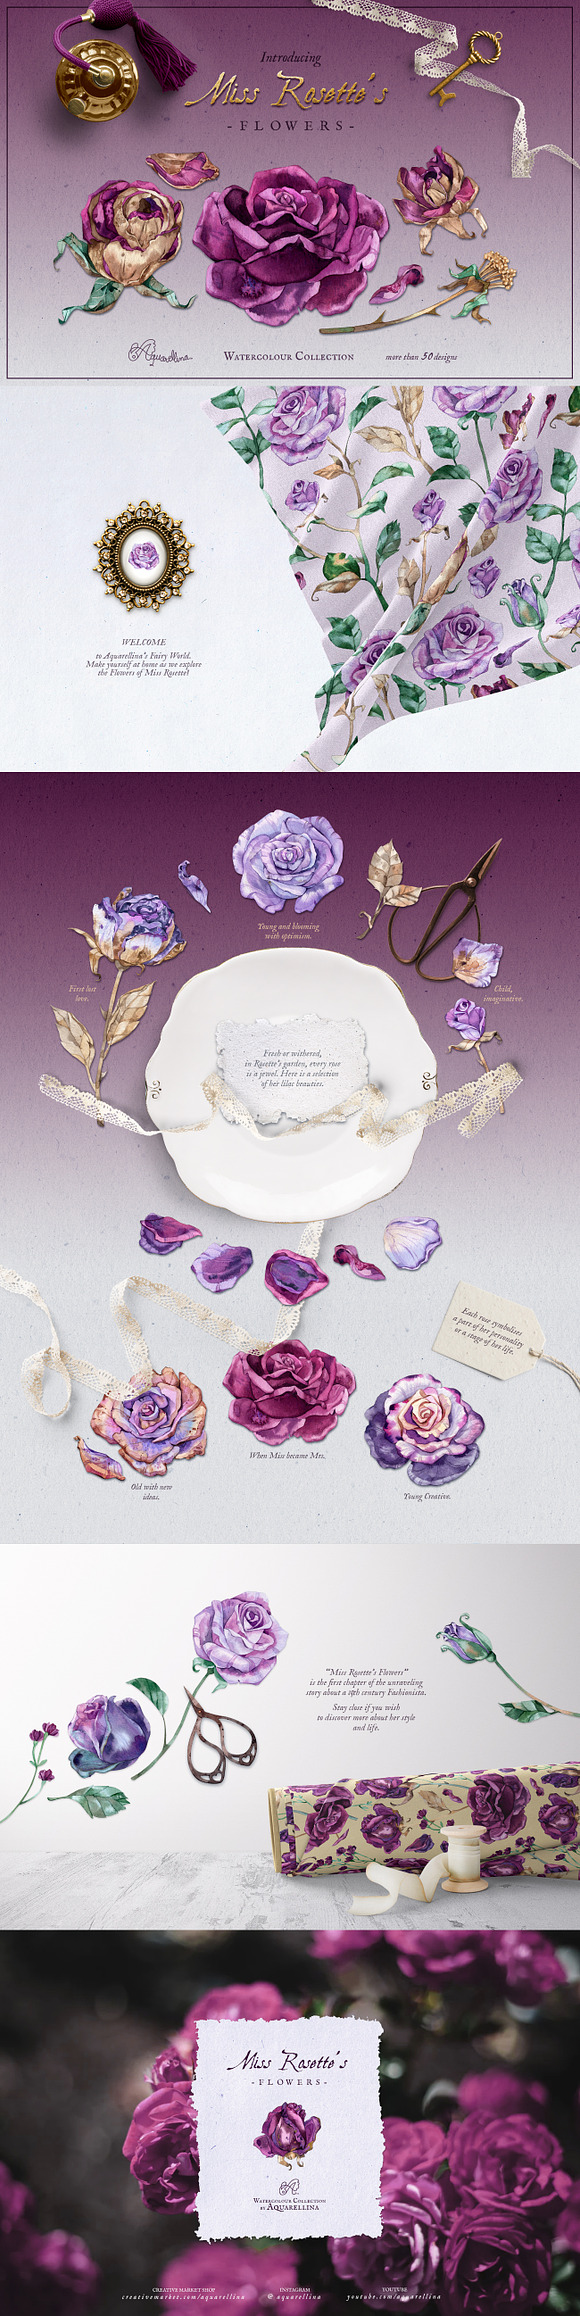 Miss Rosette's Flowers in Illustrations - product preview 13